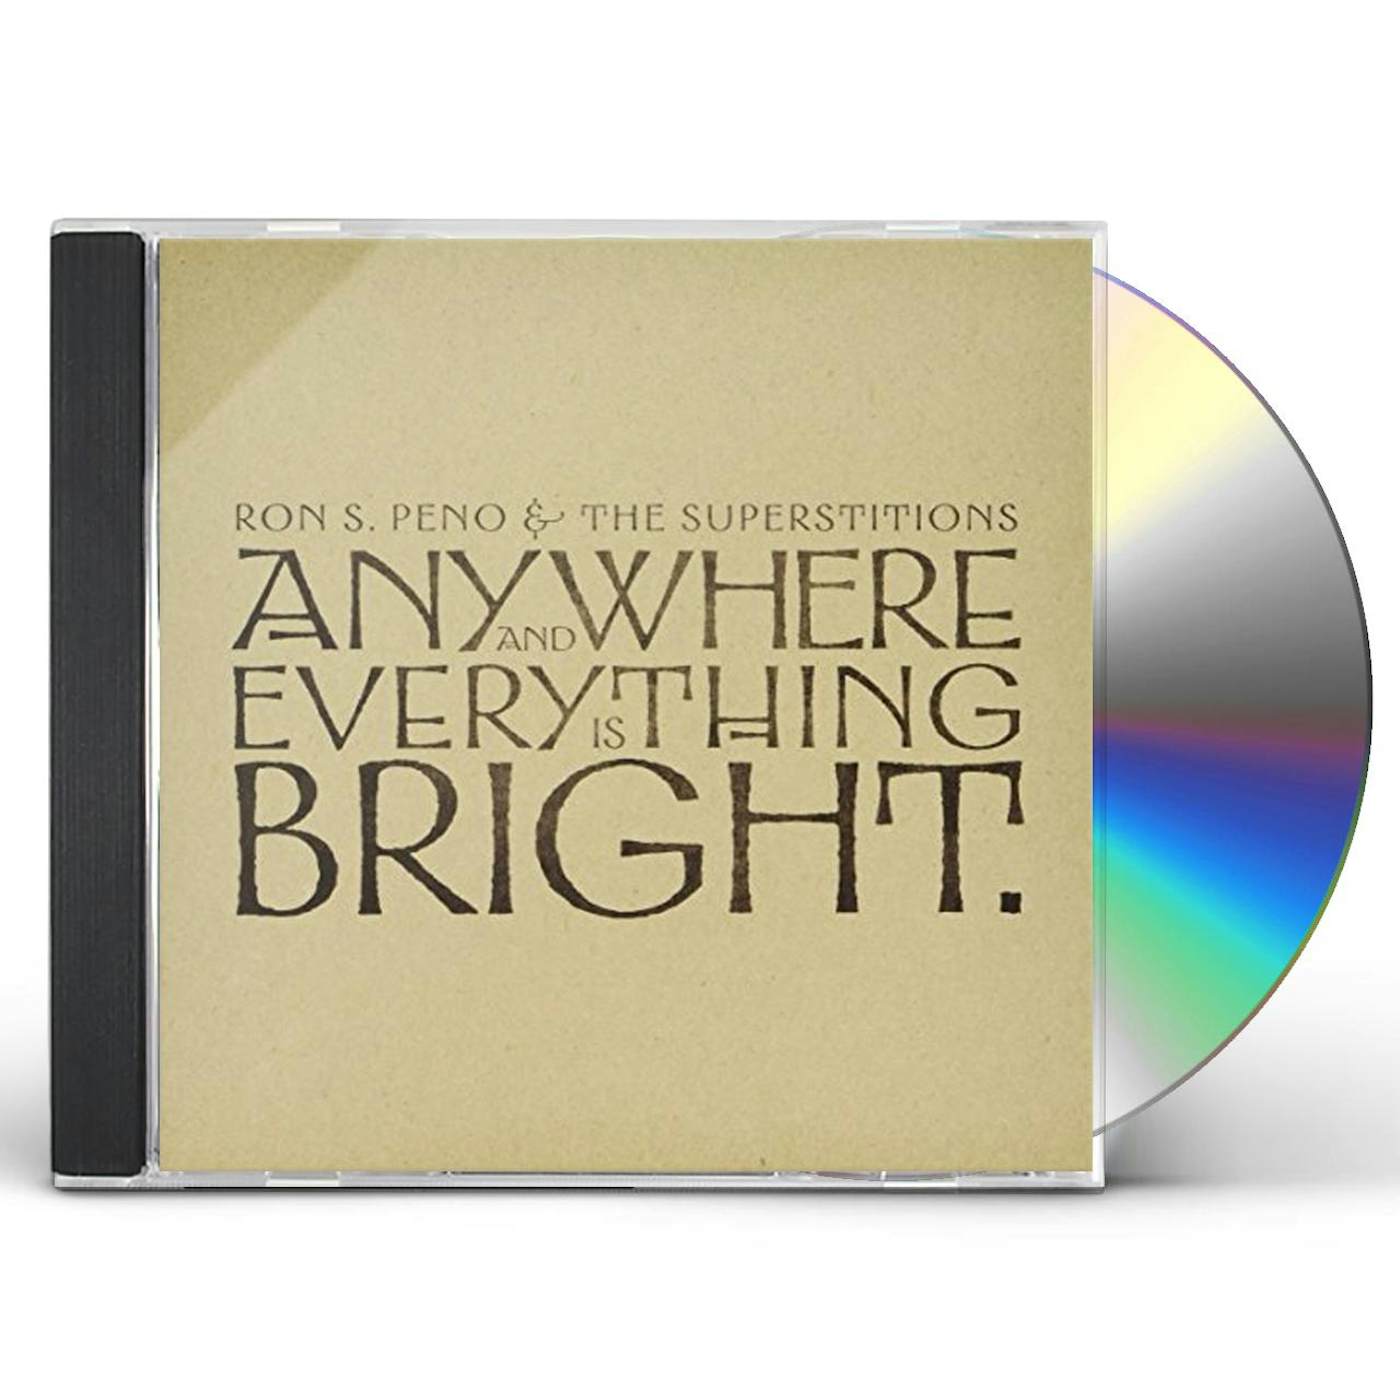 Ron S. Peno and The Superstitions ANYWHERE & EVERYTHING IS BRIGHT CD